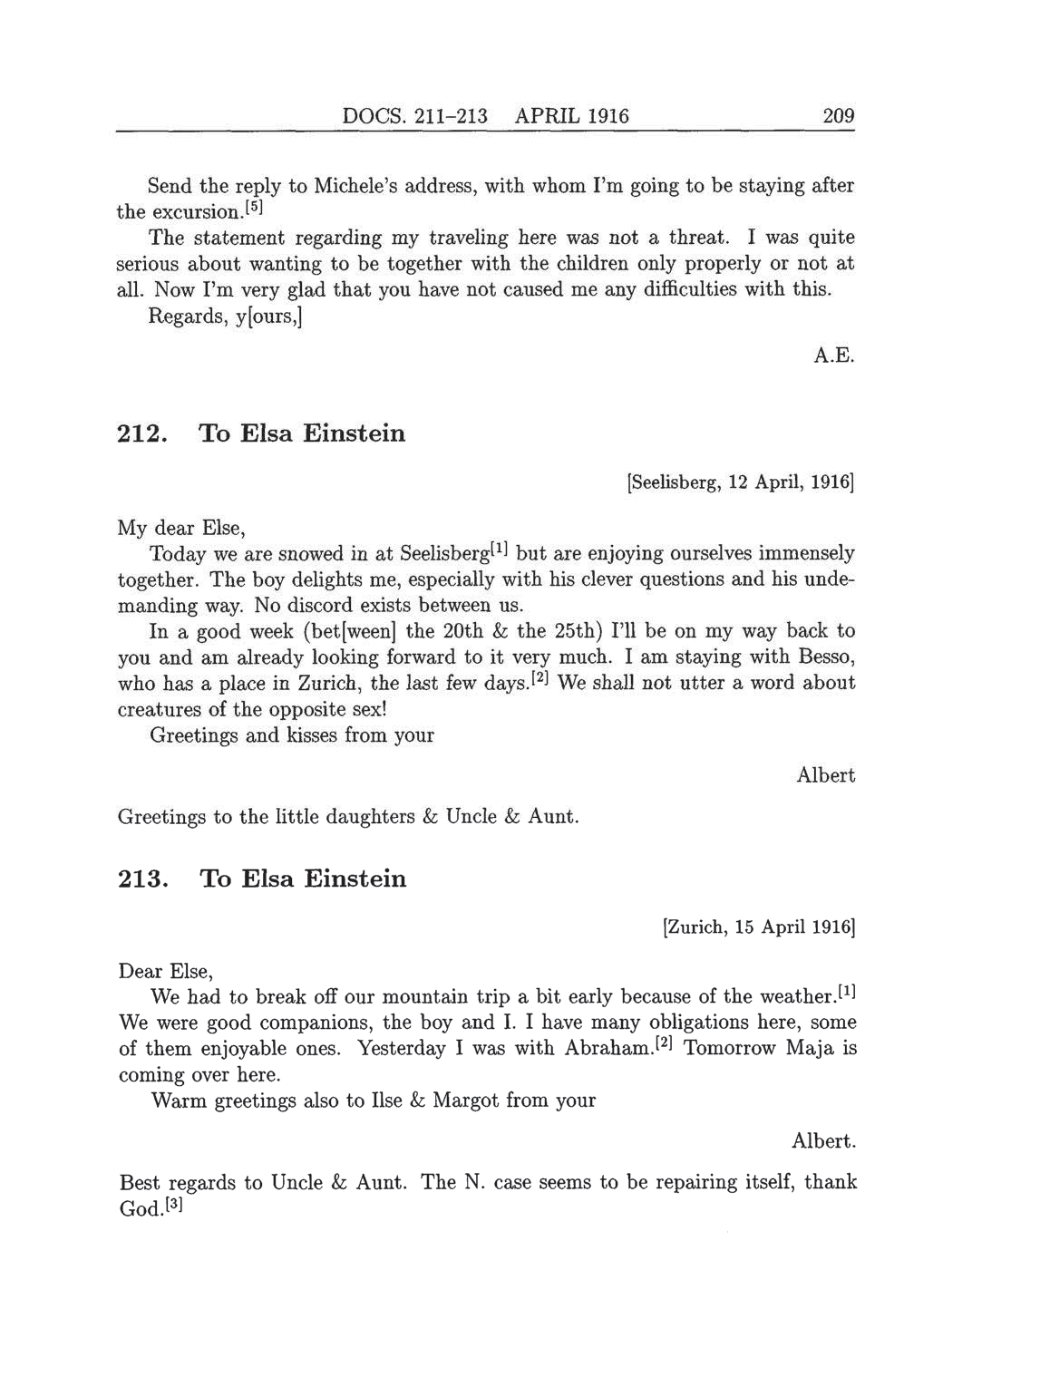 Volume 8: The Berlin Years: Correspondence, 1914-1918 (English translation supplement) page 209